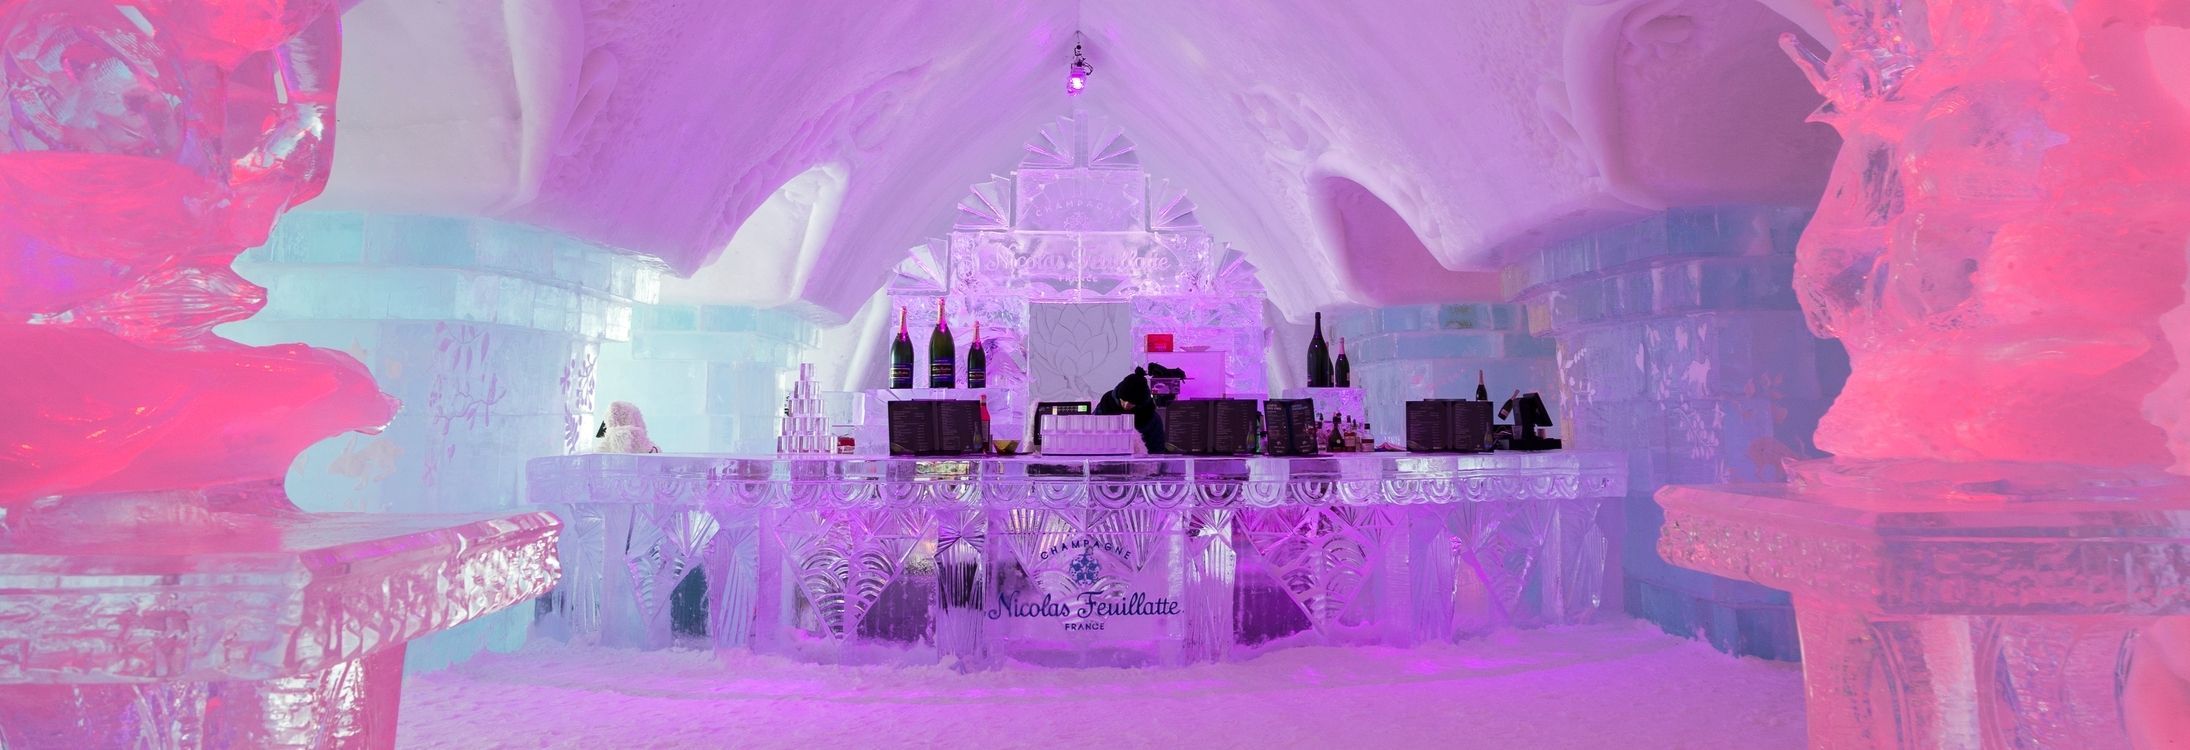 The Ice Bar, Quebec